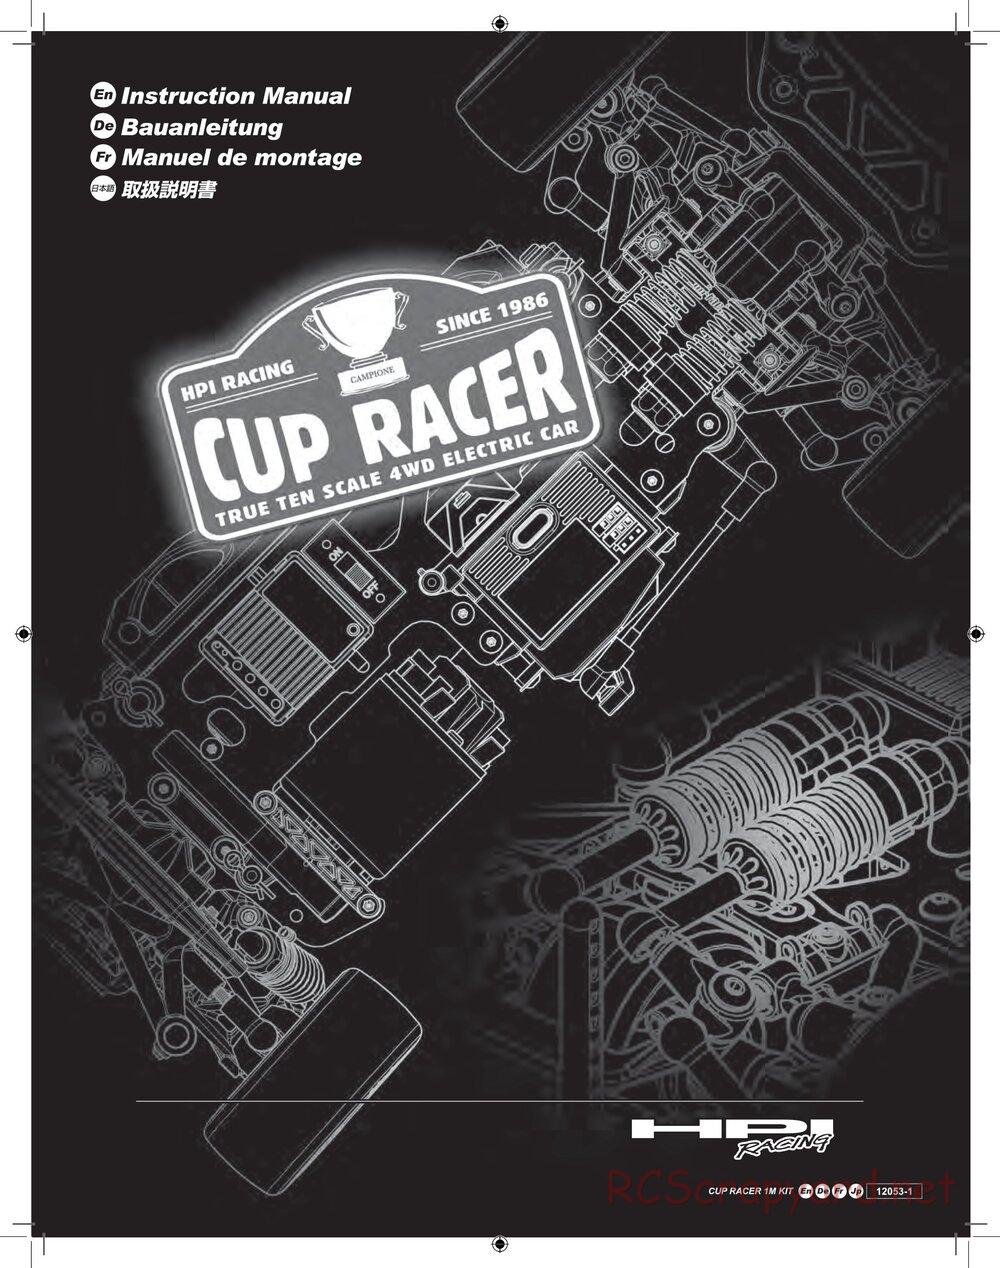 HPI - Cup Racer - Manual - Page 1